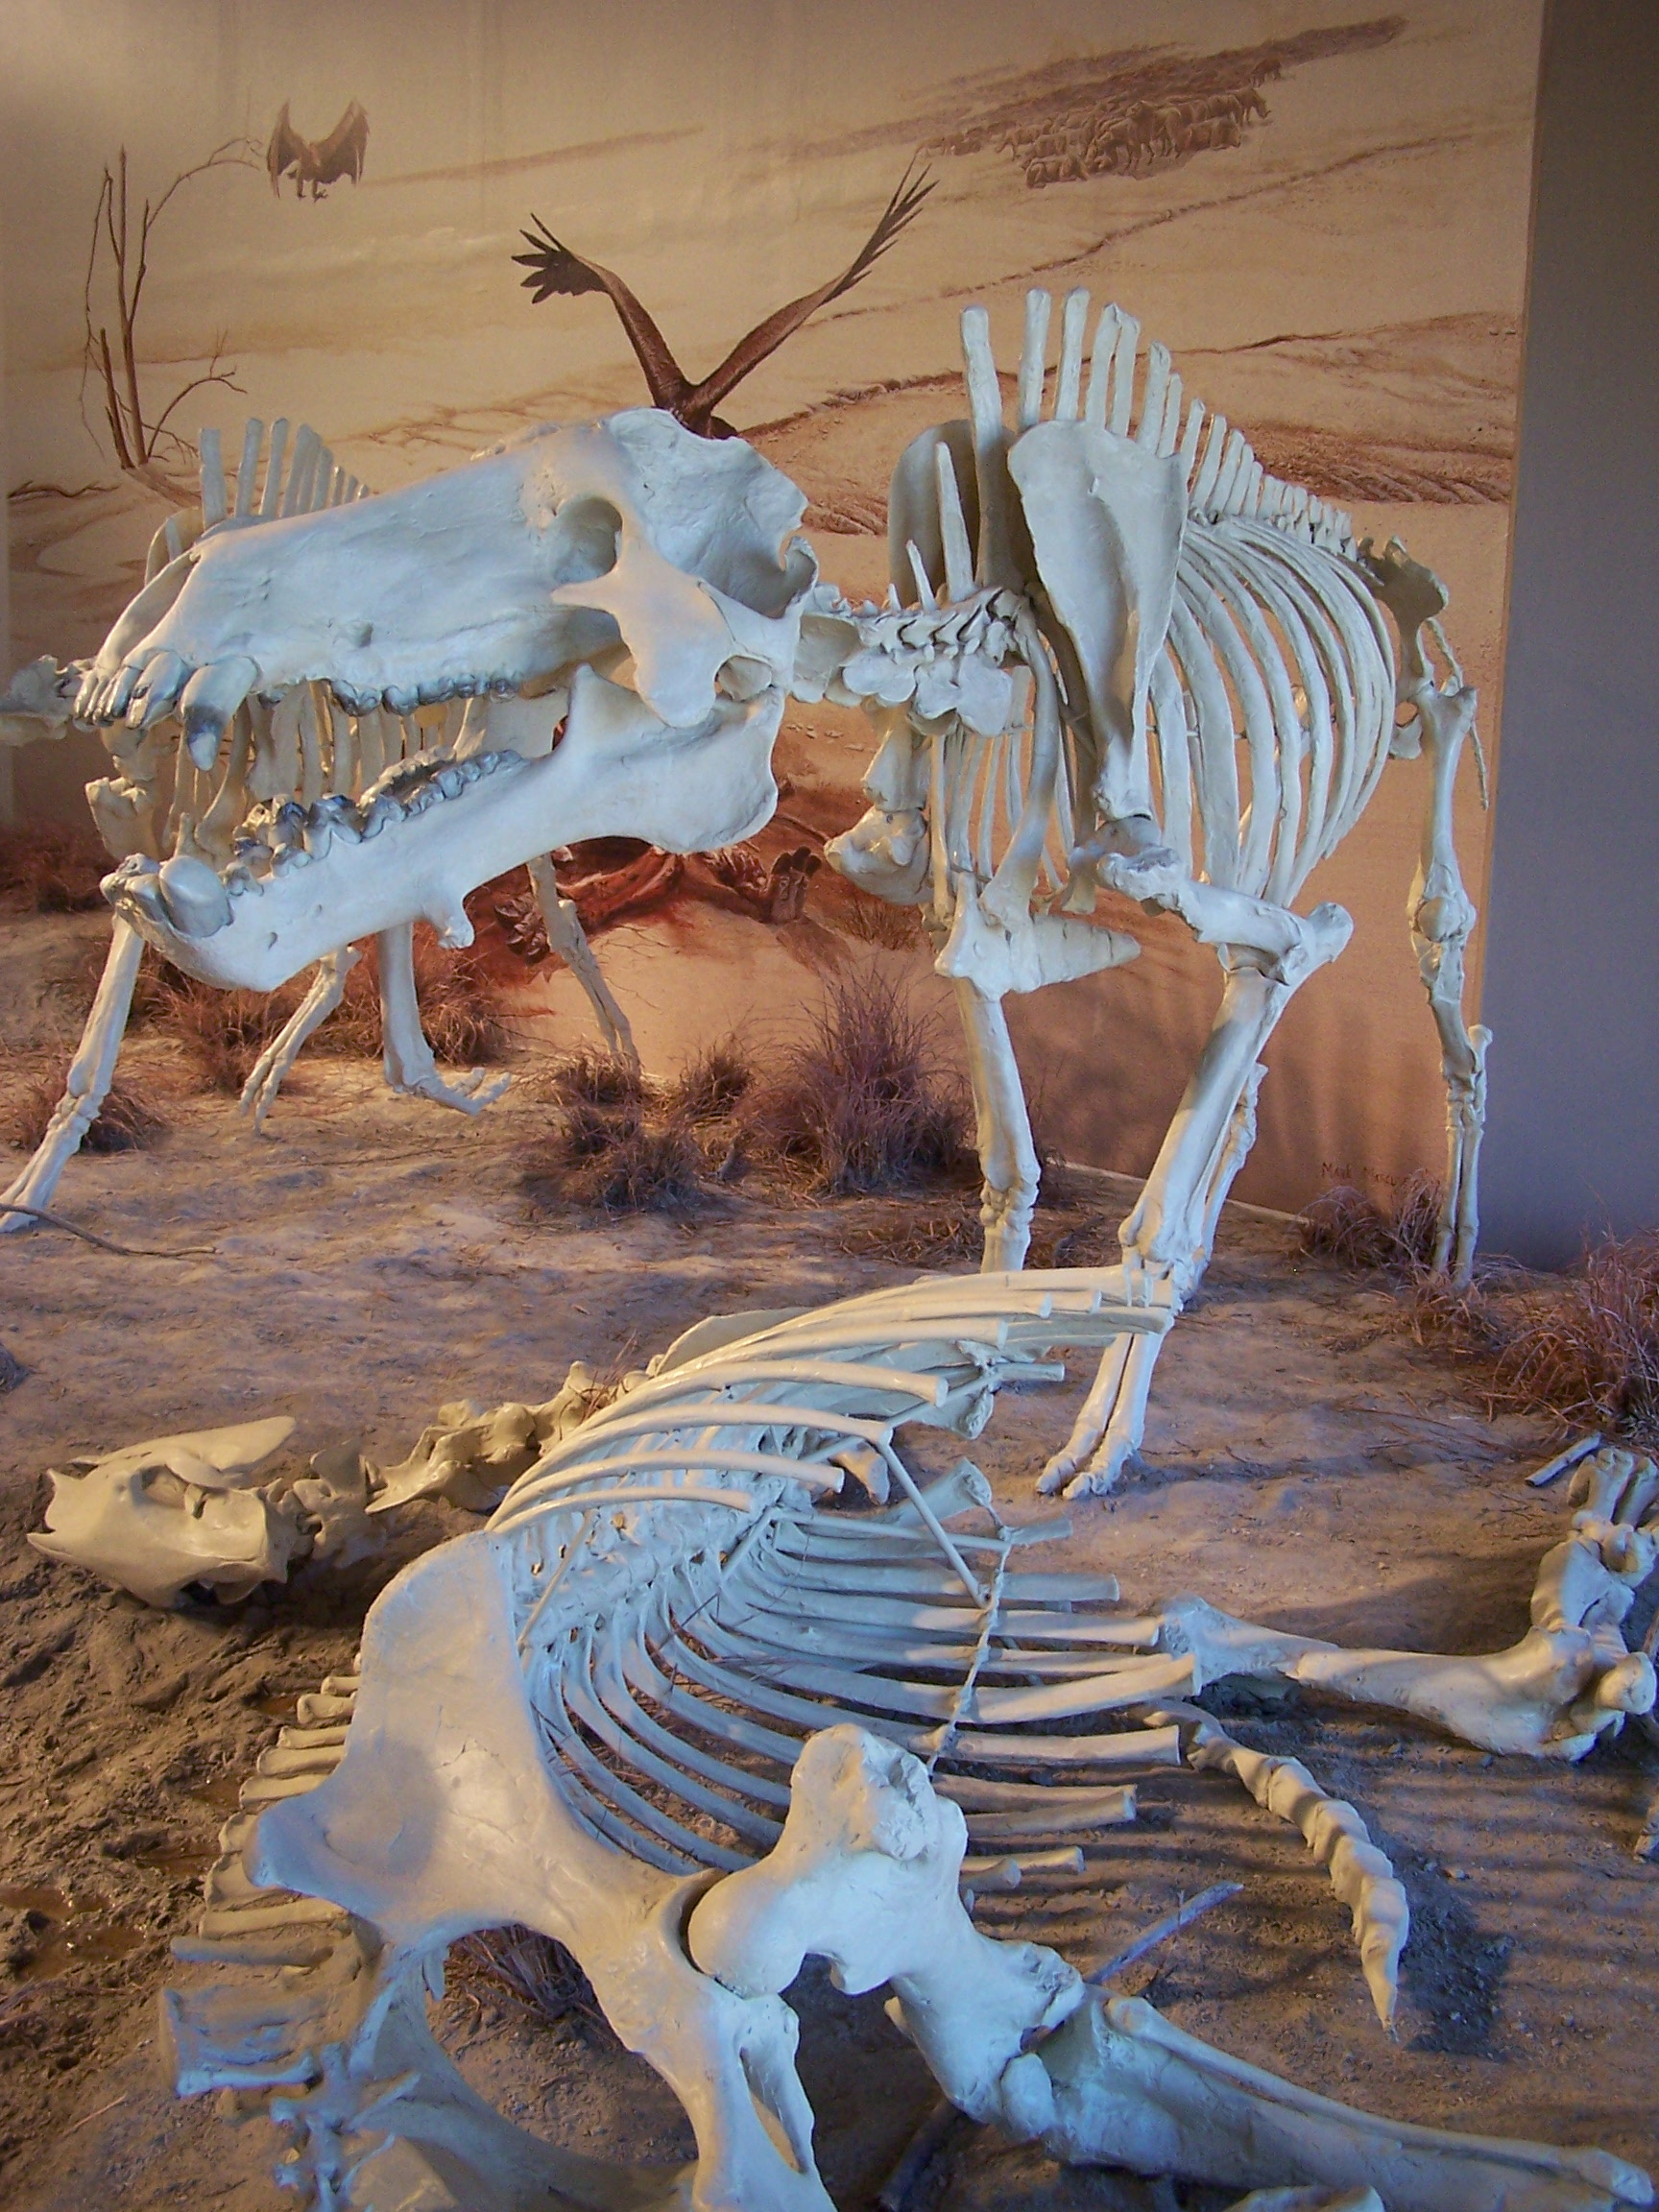 The Dinohyus was a scavenger, nicknamed "Terrible Pig"